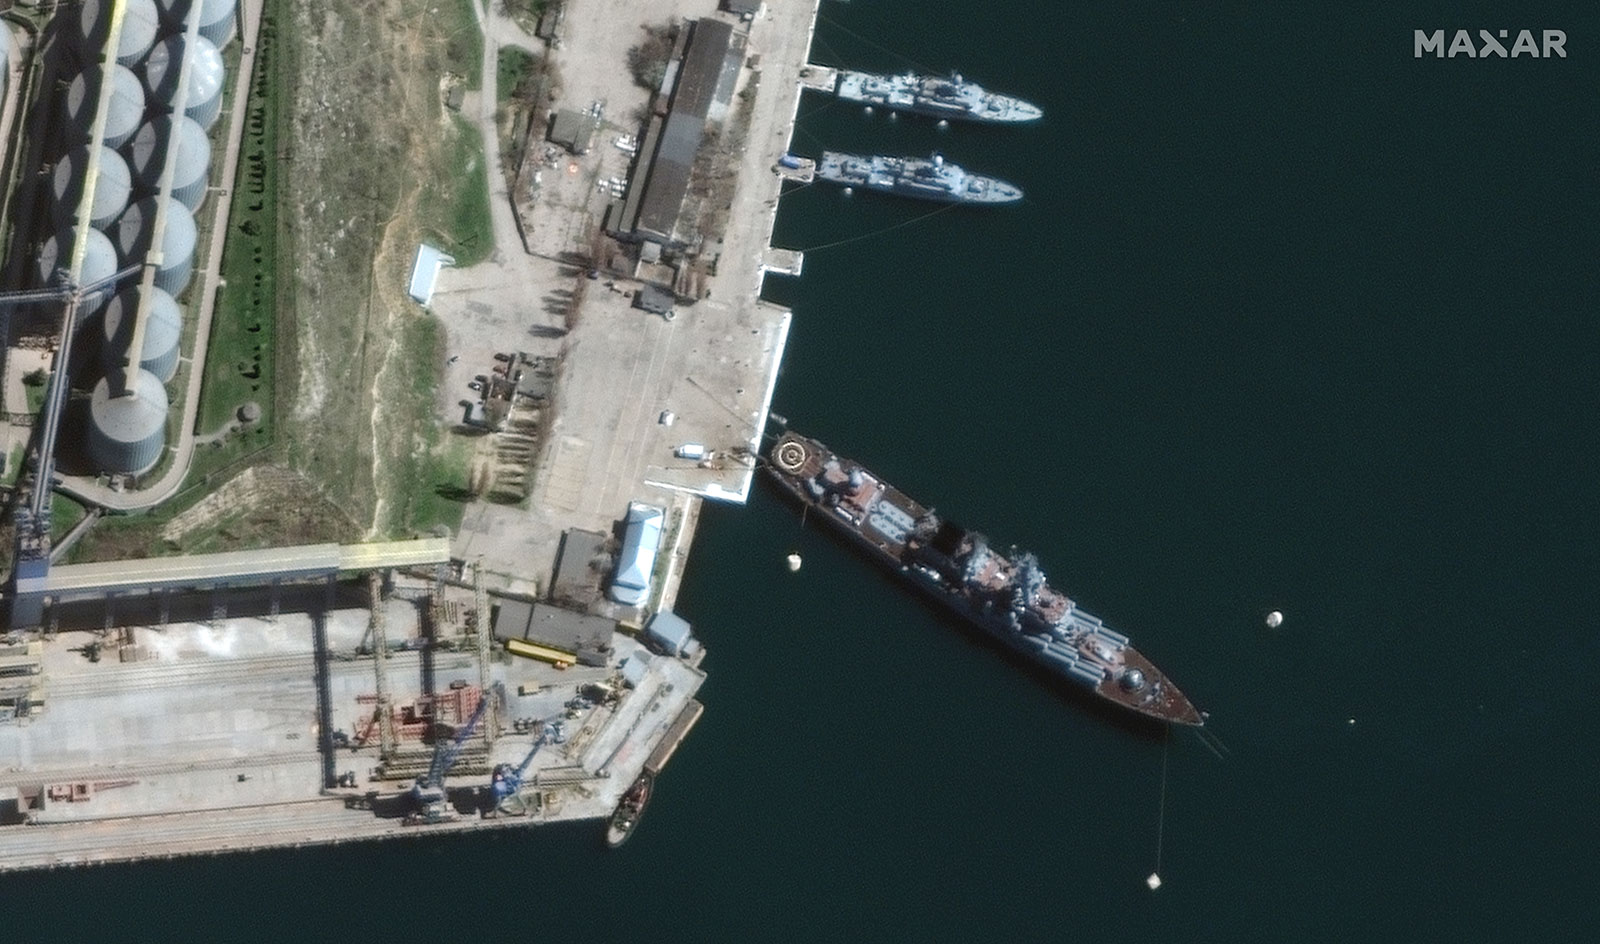 Ukraine claims it hit a Russian warship with a missile strike. Russia says otherwise